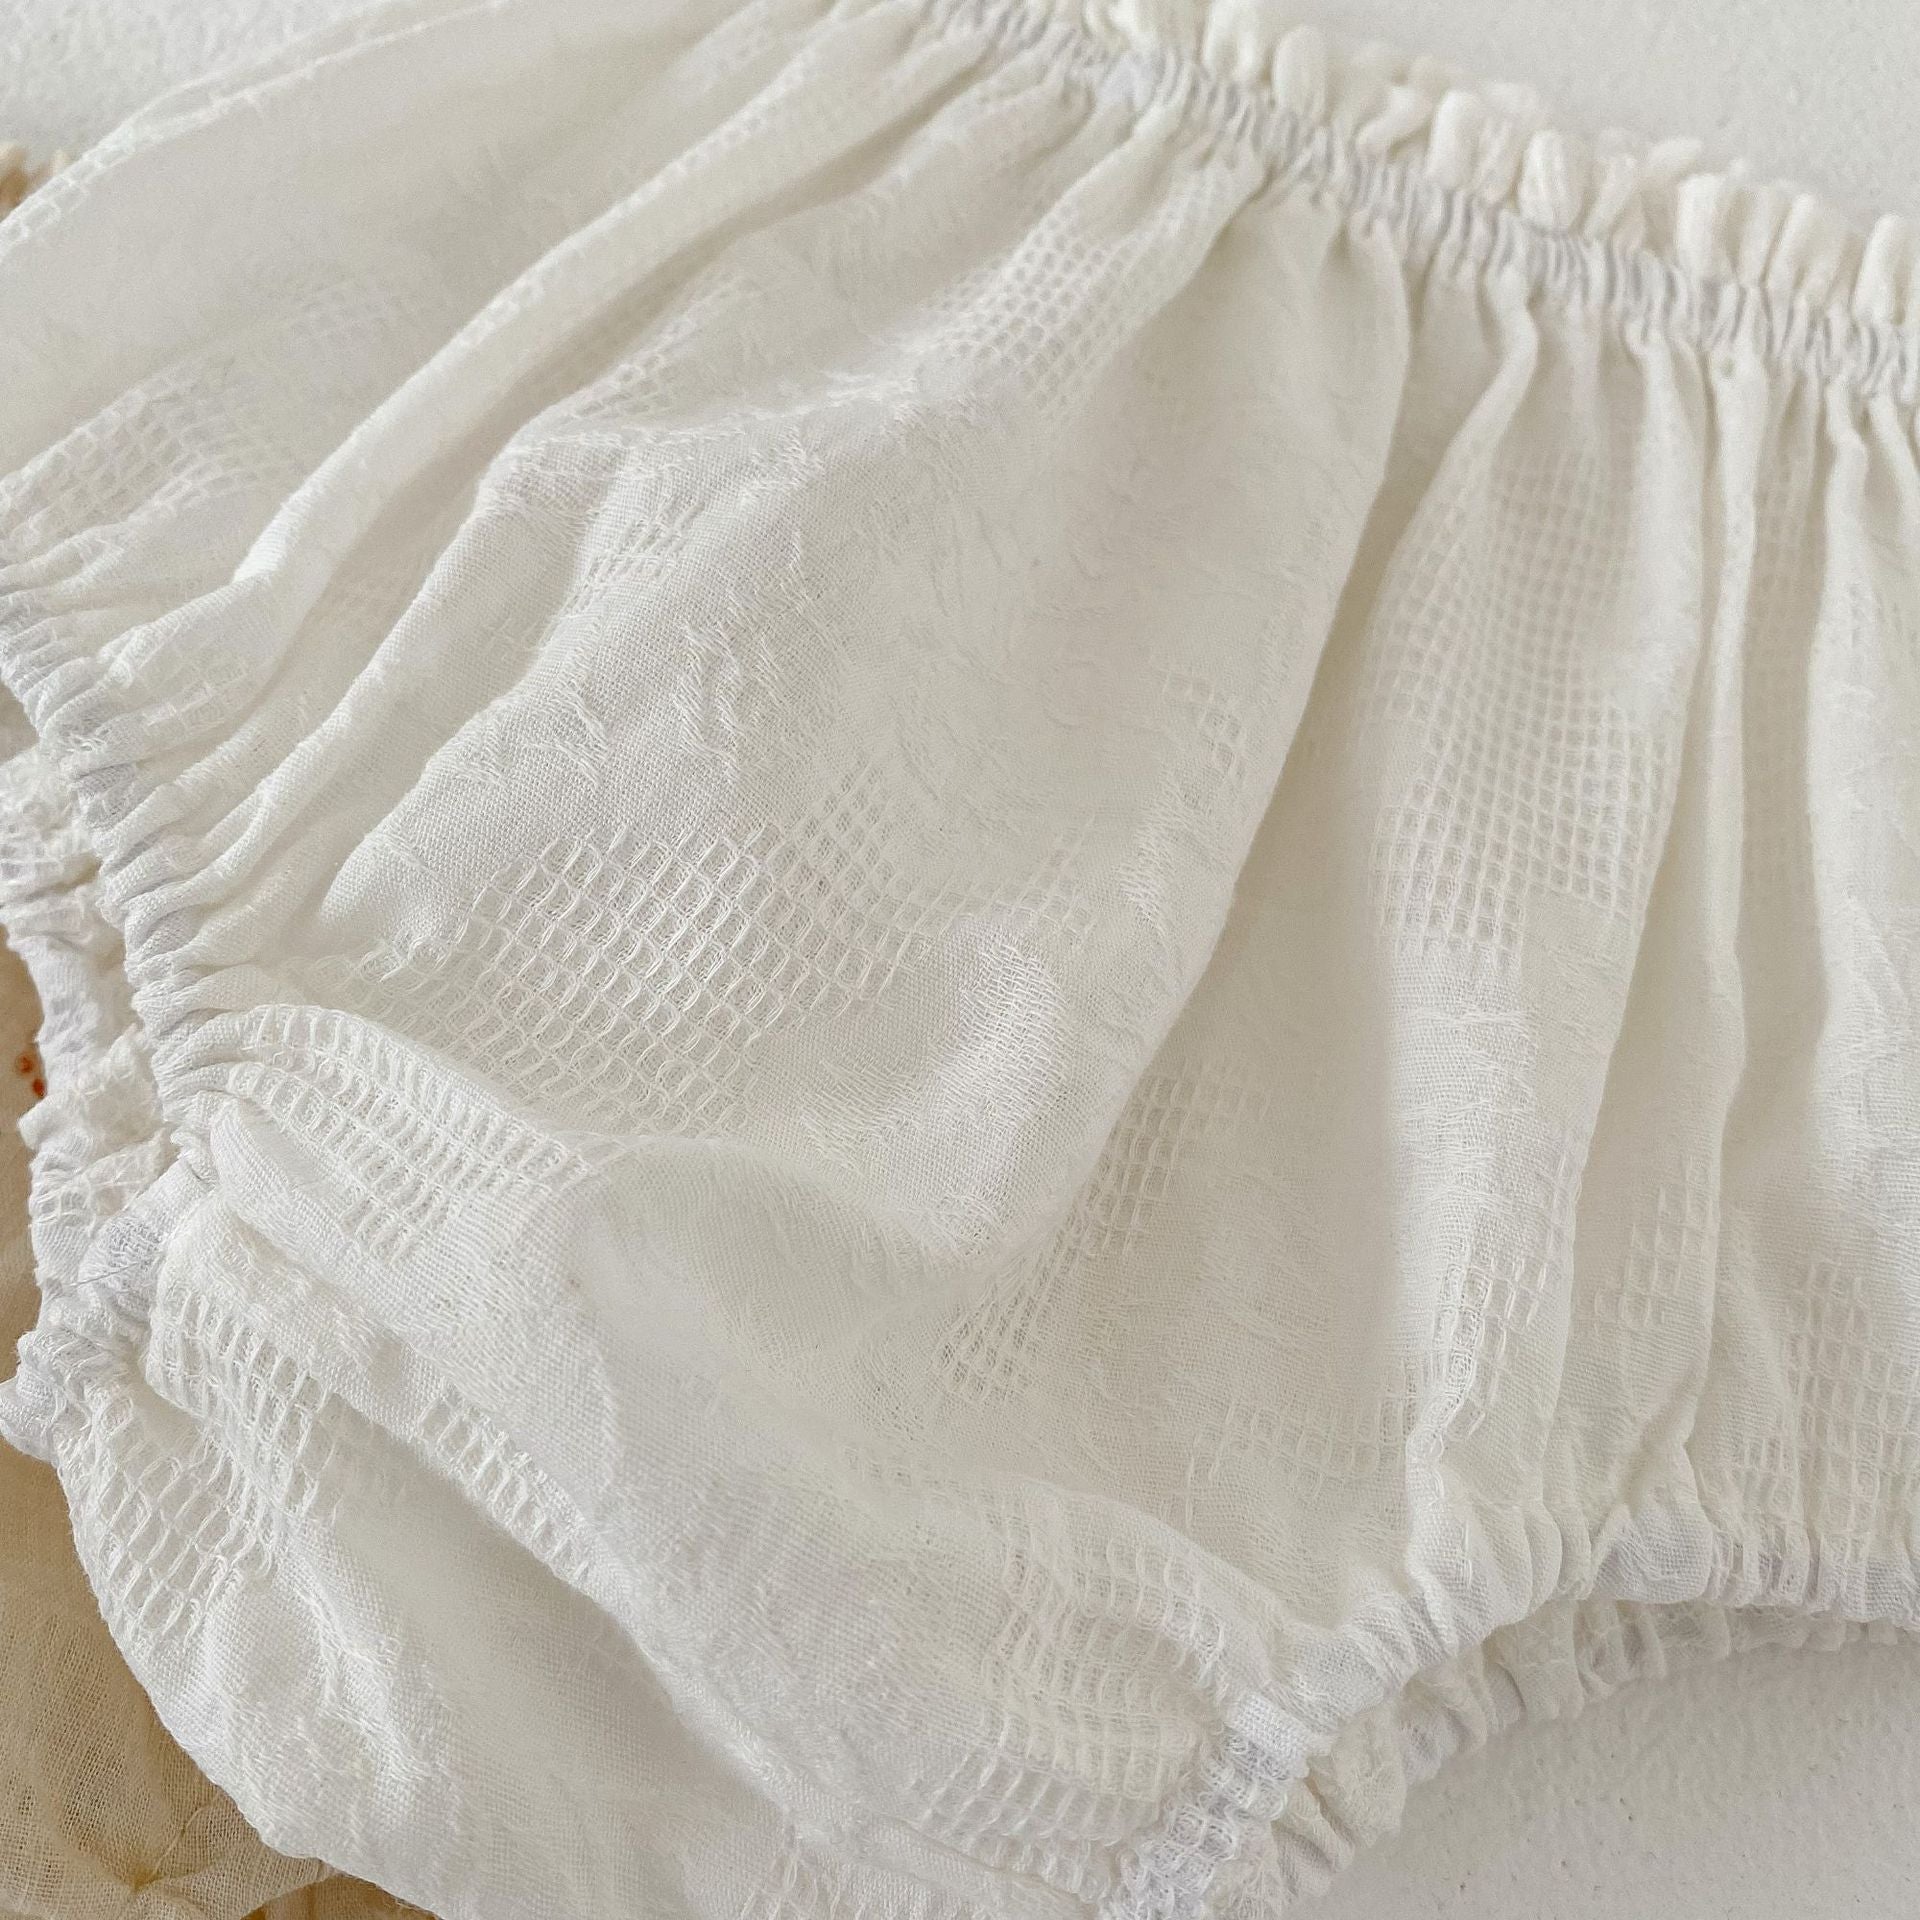 Cotton design bloomers [N3073]